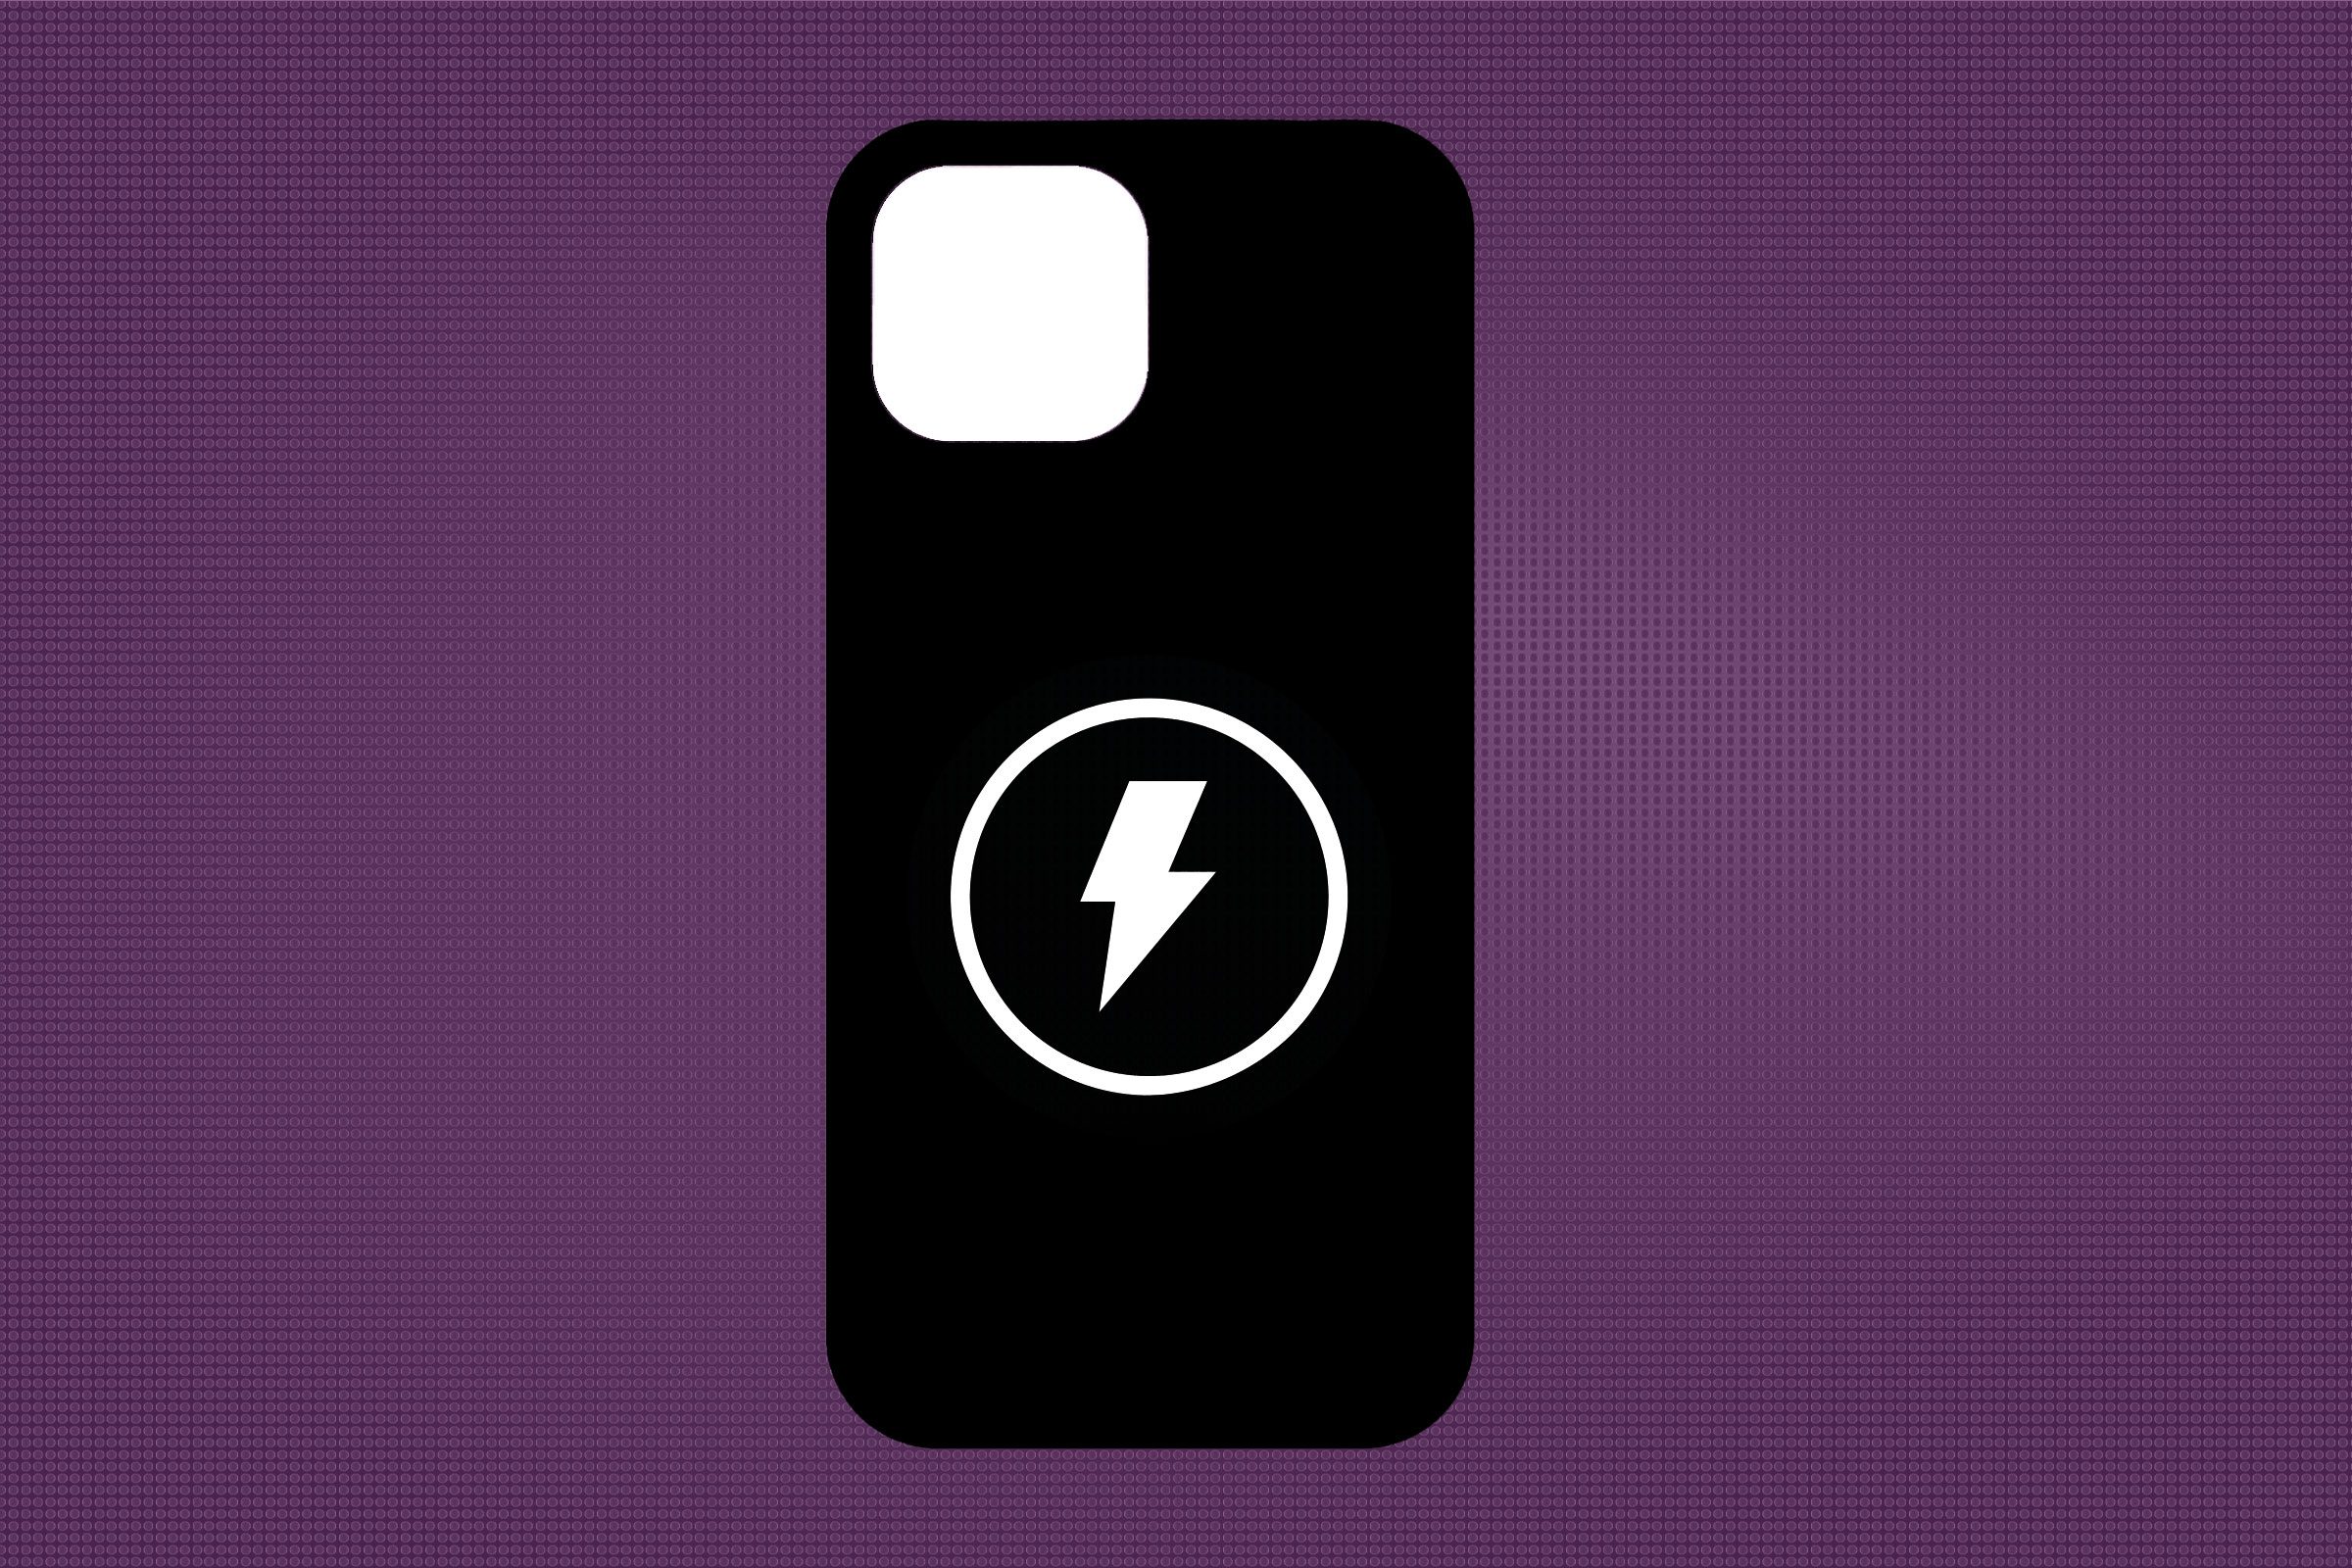 charging iphone case icon on purple background